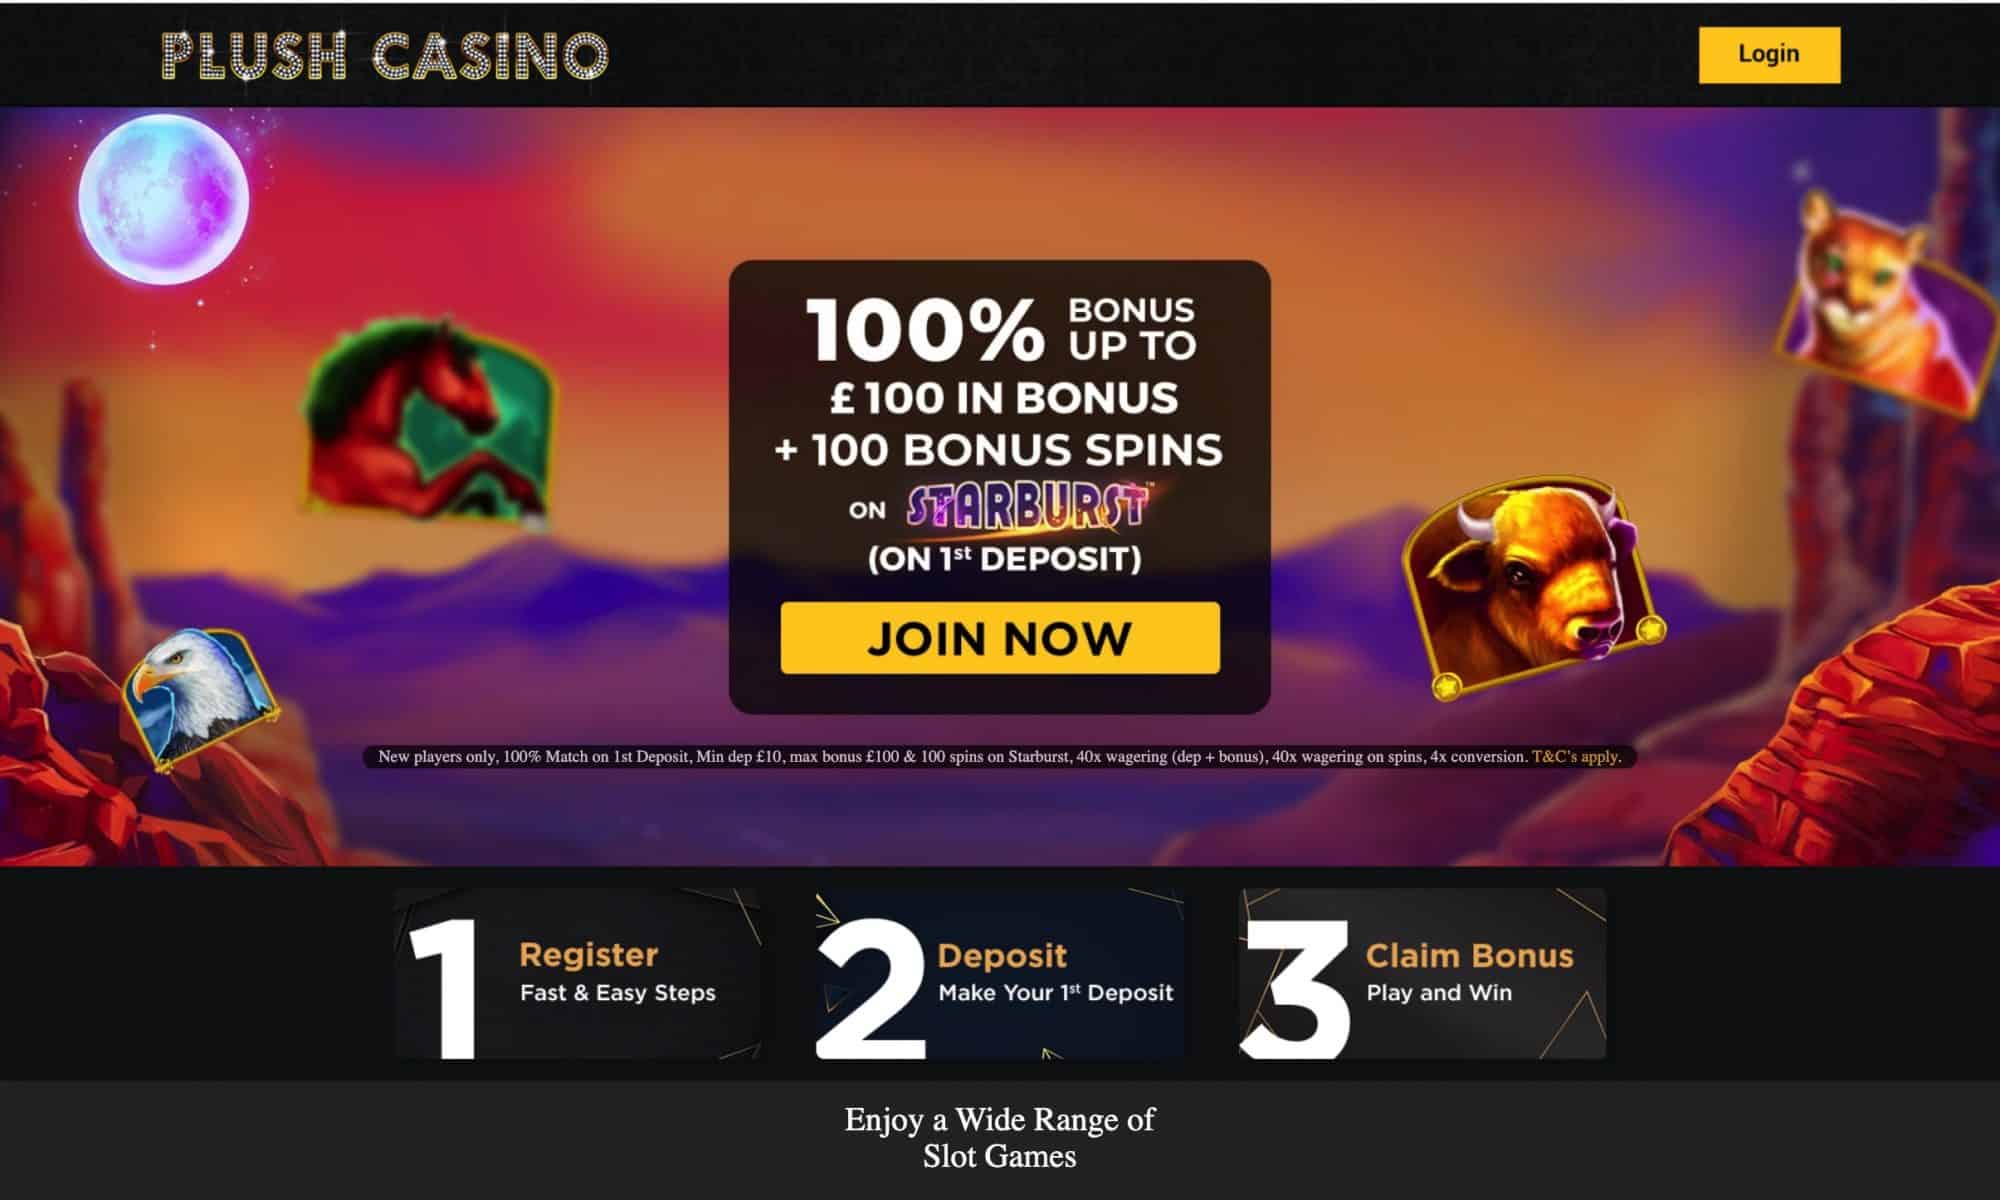 Plush Casino - Up to $100 and 100 free spins on your 1st deposit!